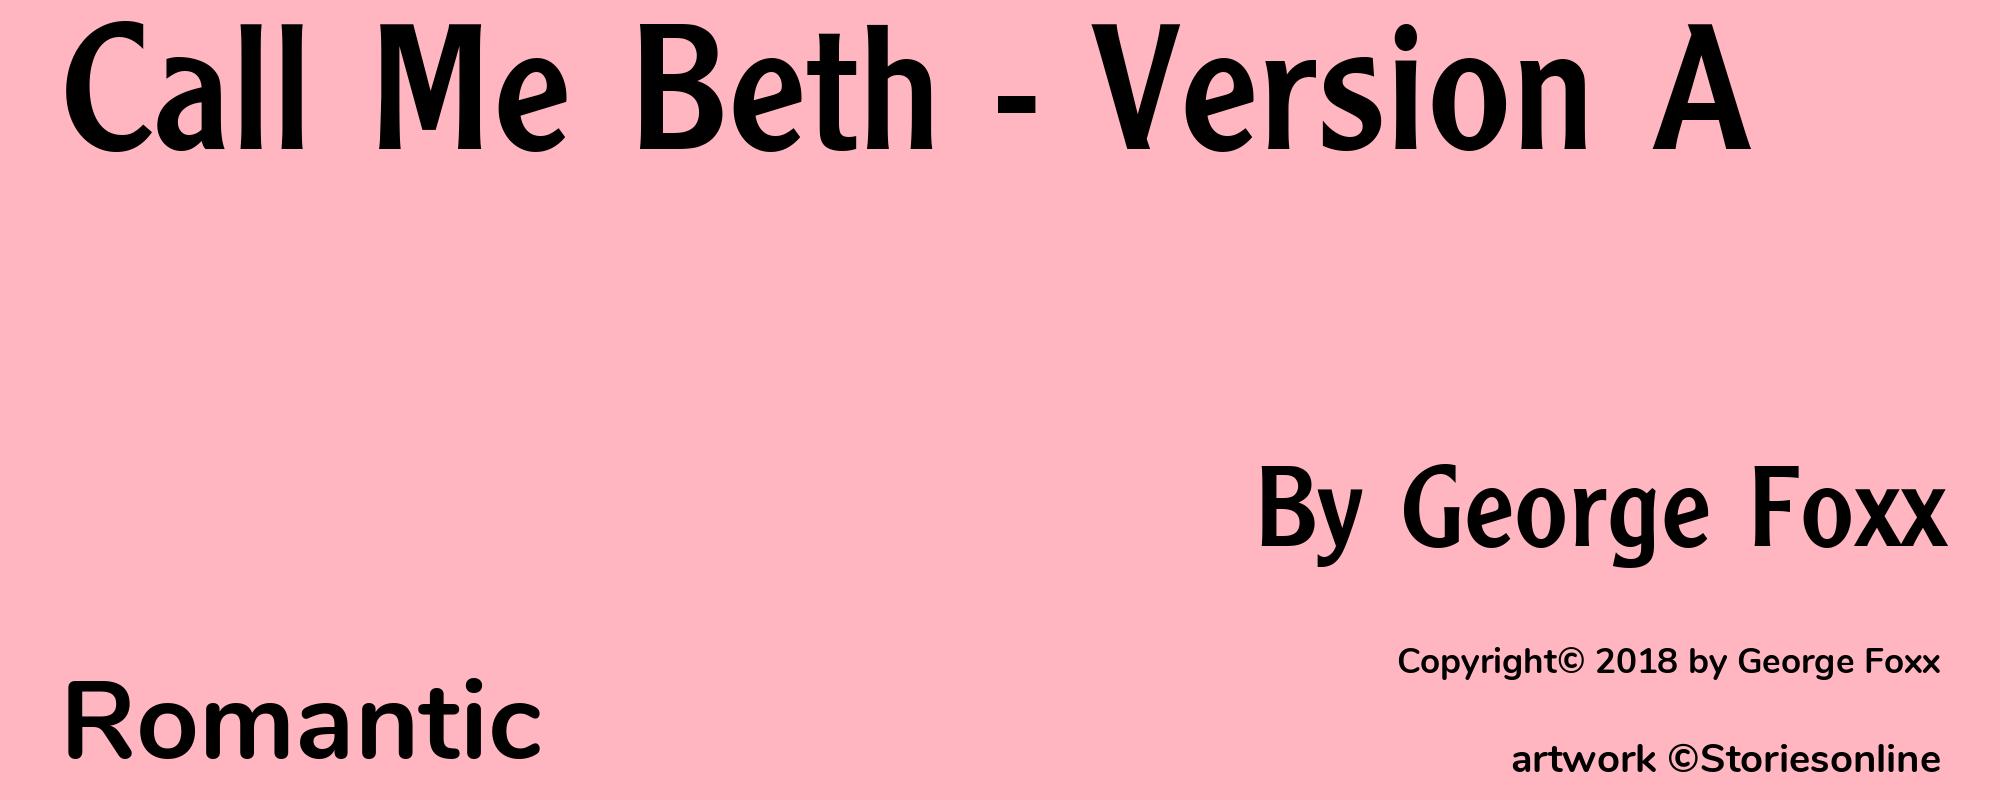 Call Me Beth - Version A - Cover